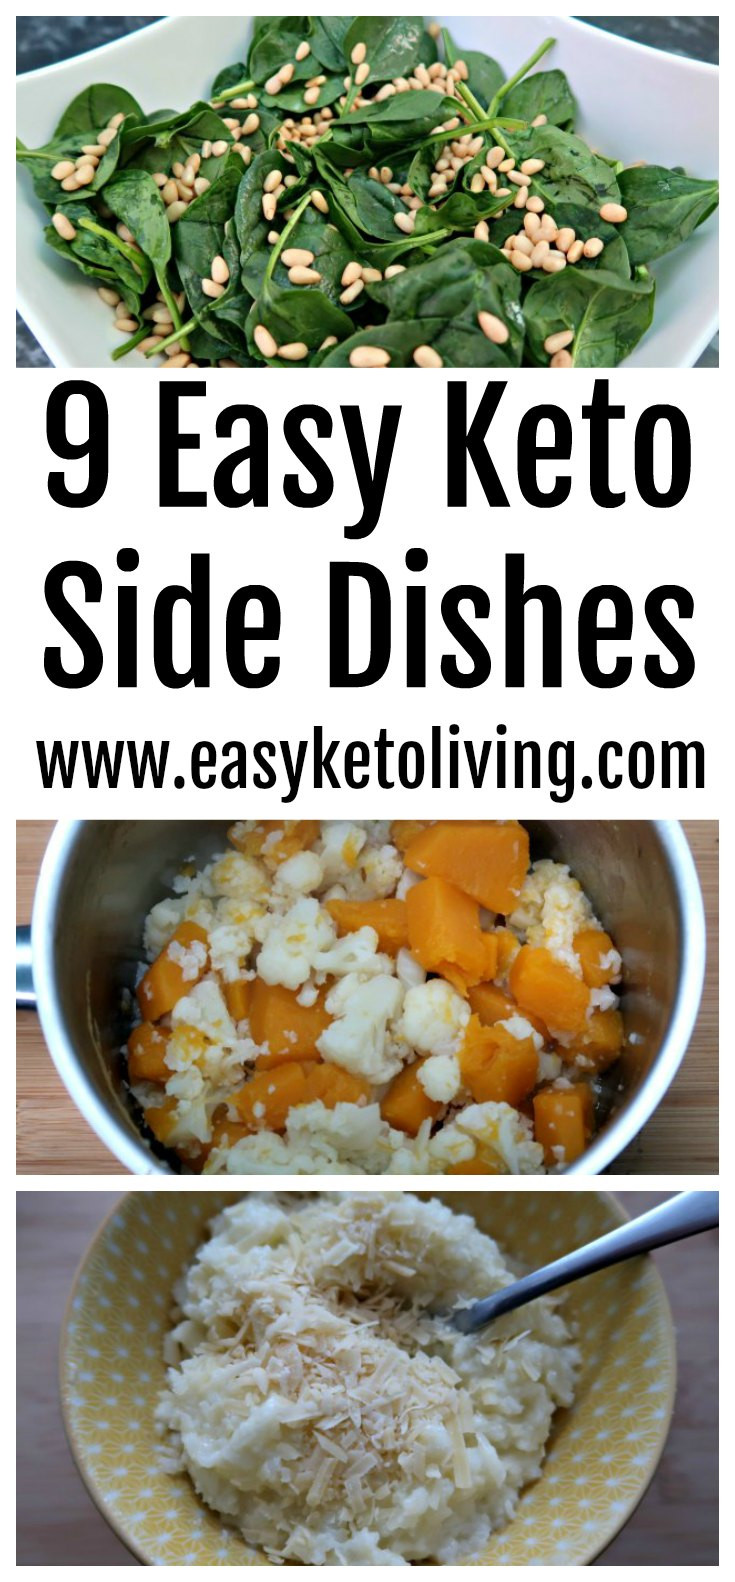 Low Carb Keto Sides
 9 Easy Keto Sides Recipes Low Carb Side Dishes